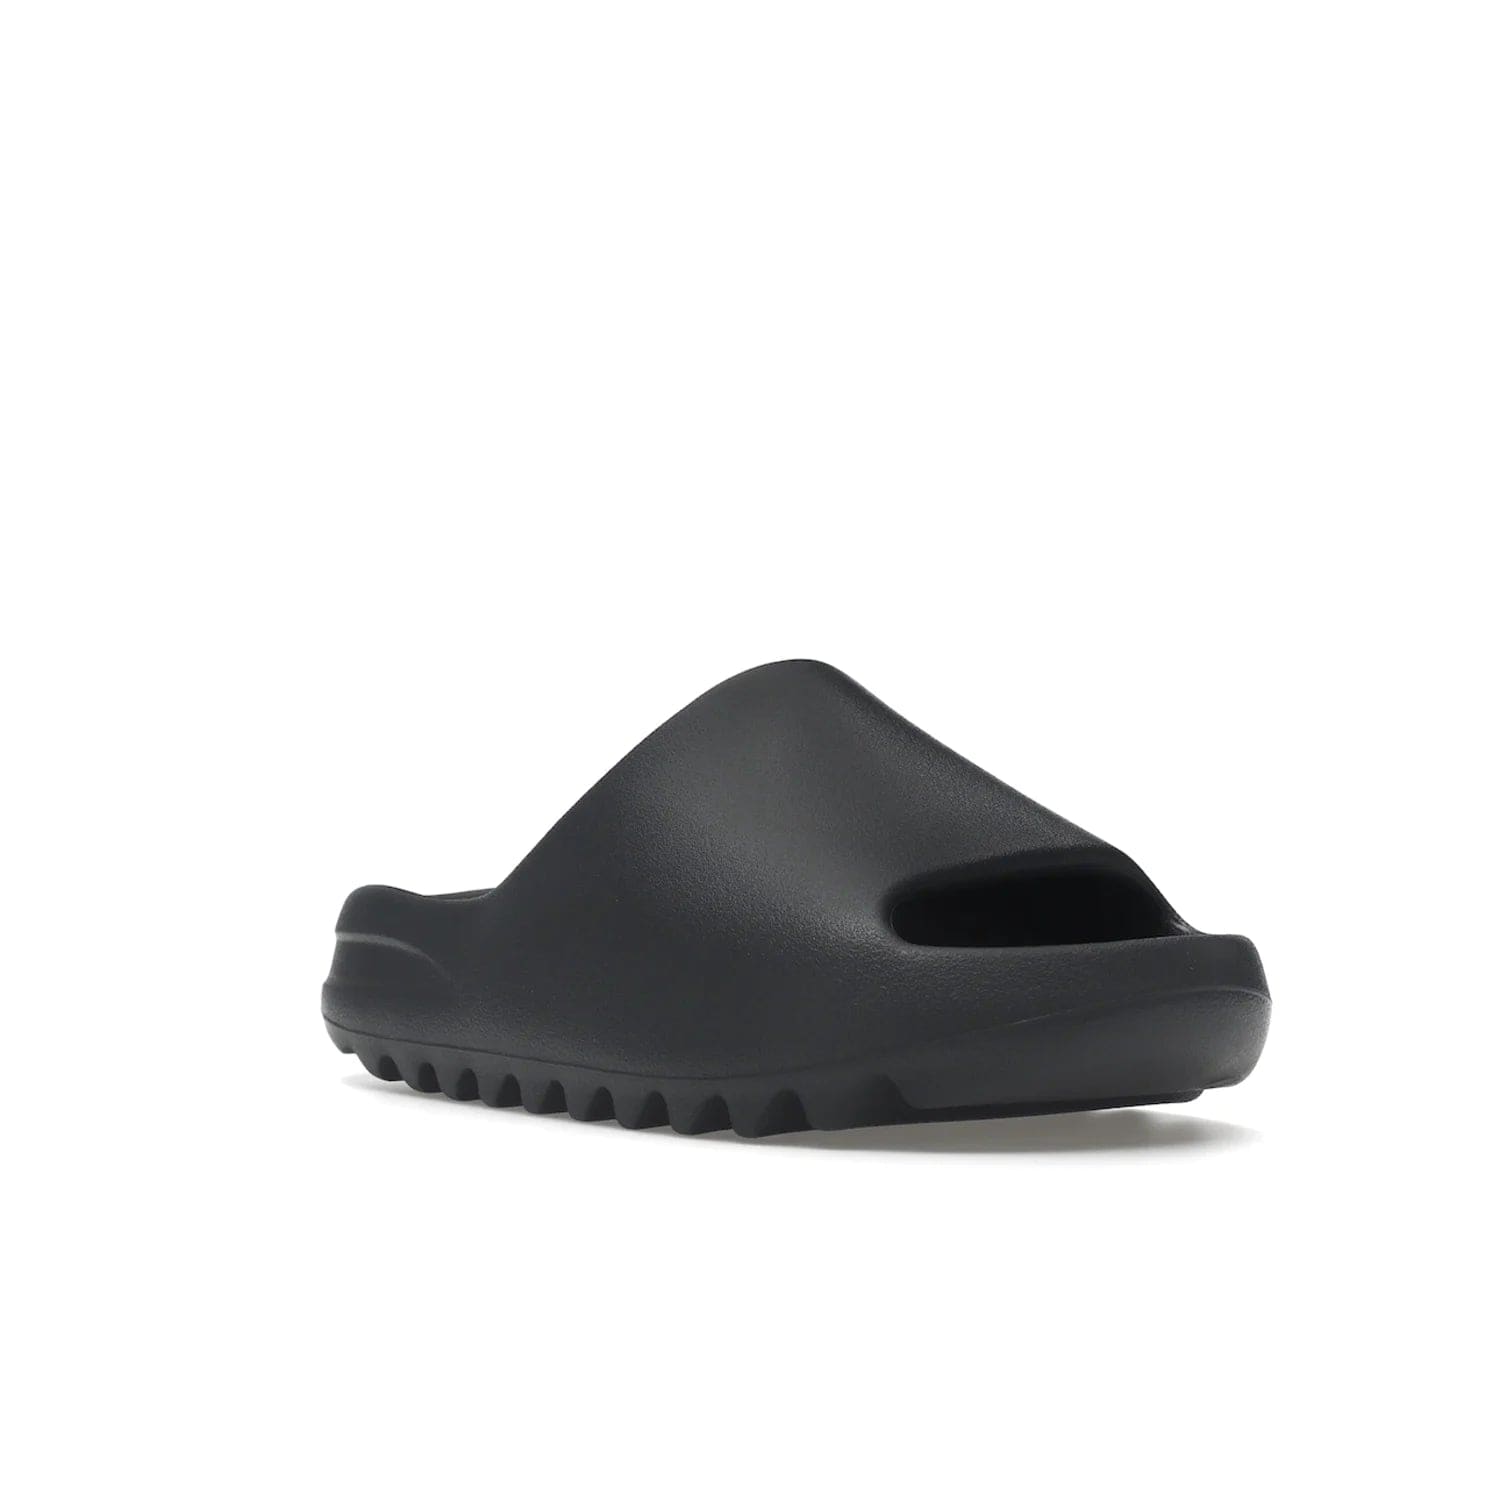 adidas Yeezy Slide Slate Grey - Image 6 - Only at www.BallersClubKickz.com - Stylish & comfortable adidas Yeezy Slide Slate Grey features an EVA foam upper, strategic cutouts, textured outsole pattern, & easy slip-on design for modern comfort & classic style.